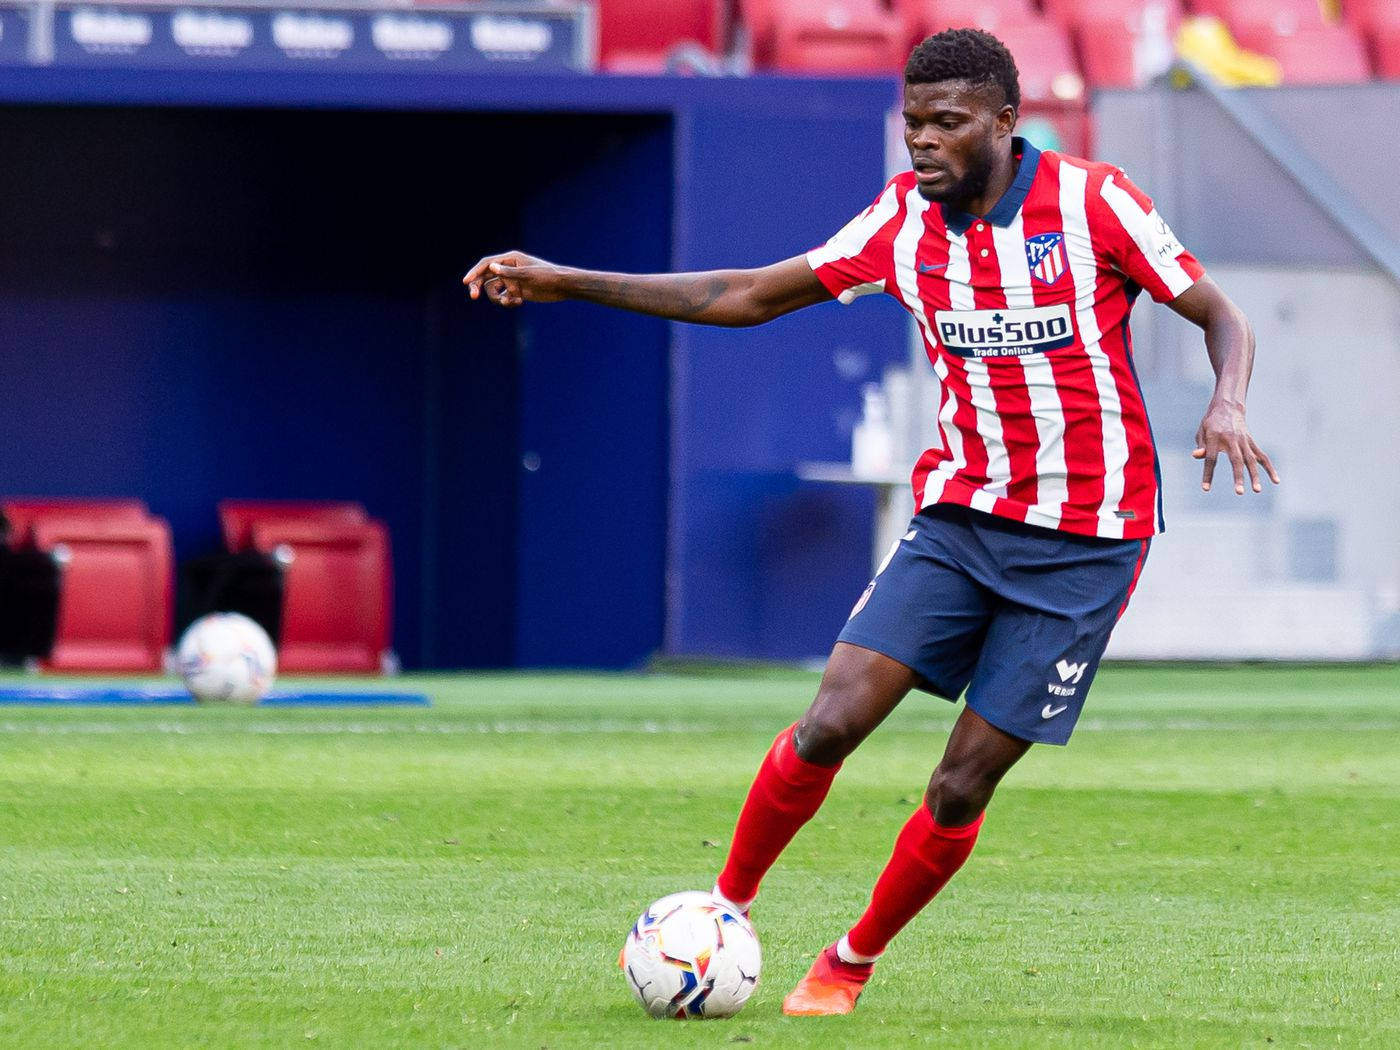 Thomas Partey And His Footwork With The Ball Wallpaper